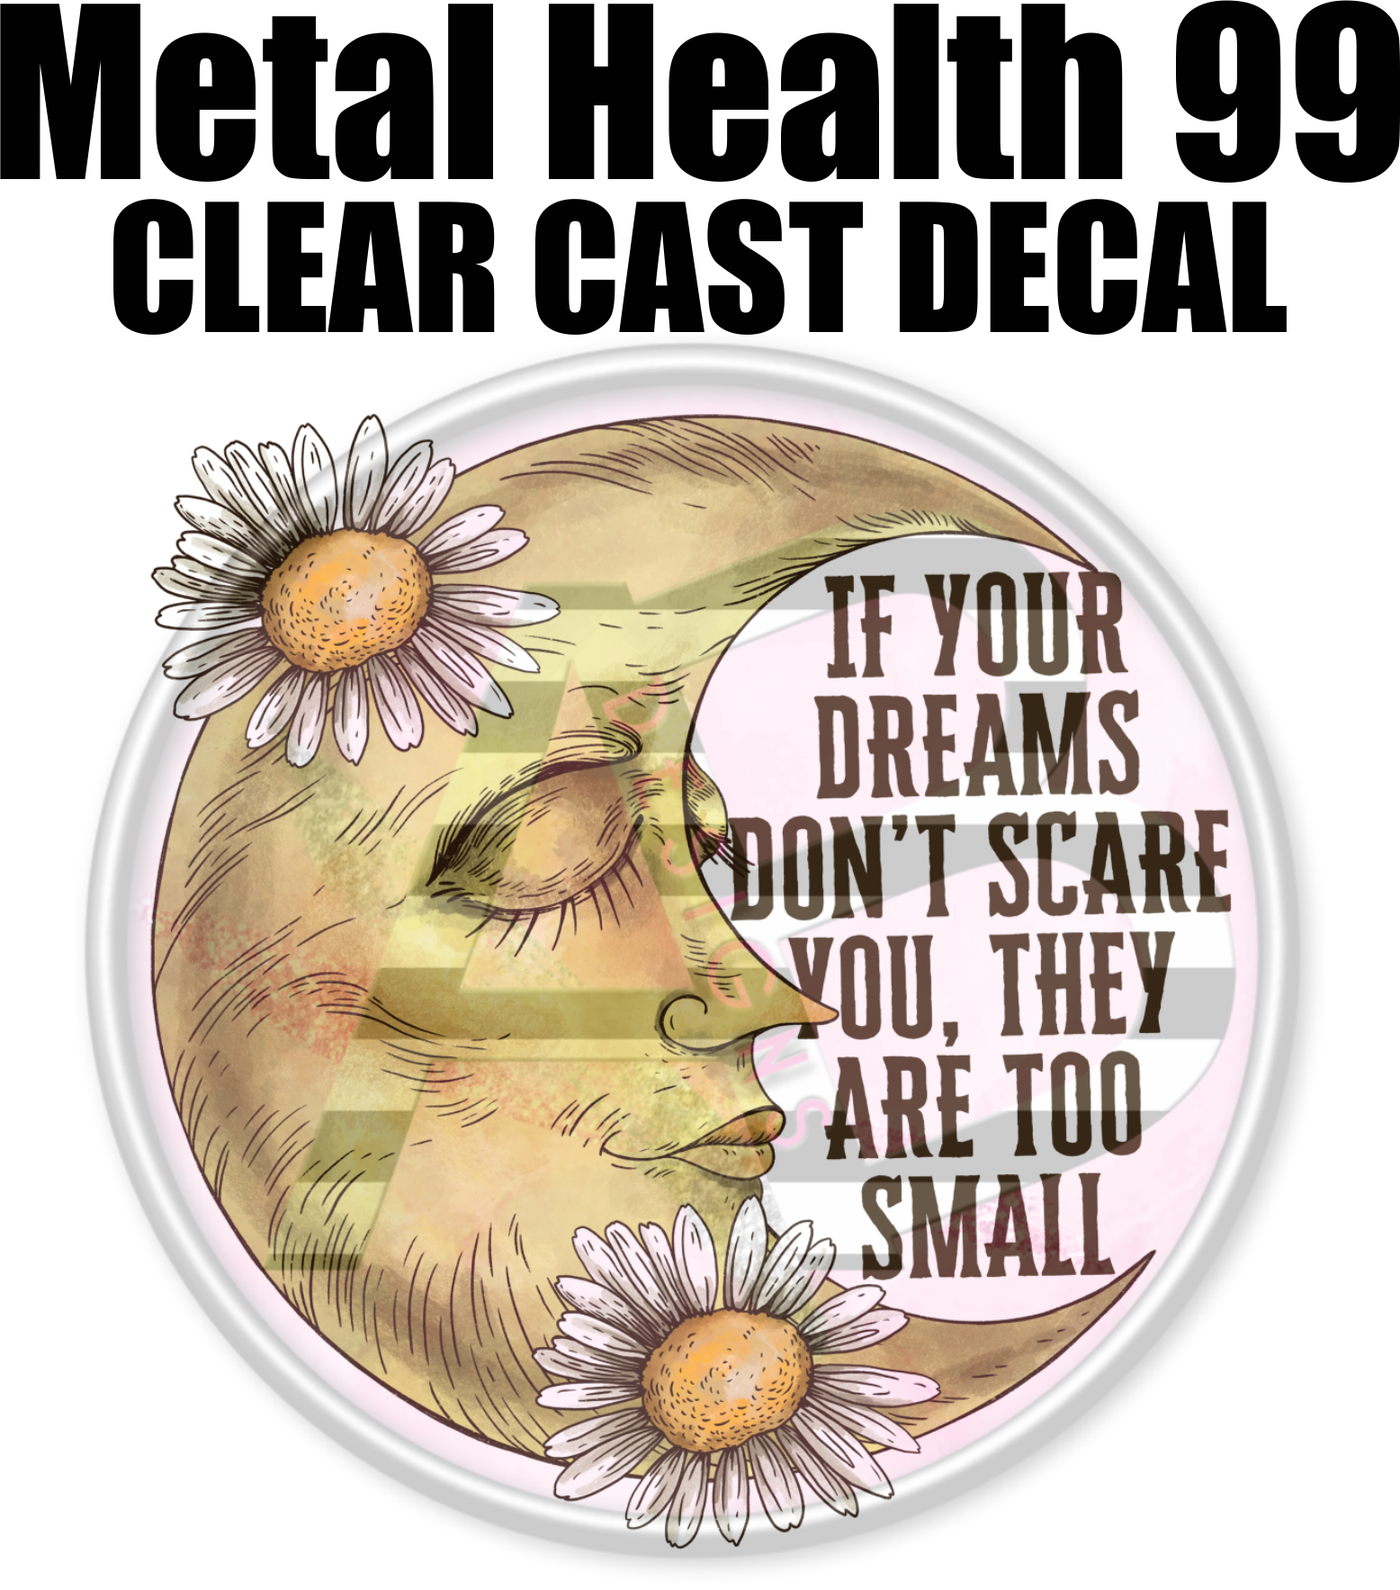 Mental Health 99 - Clear Cast Decal-568